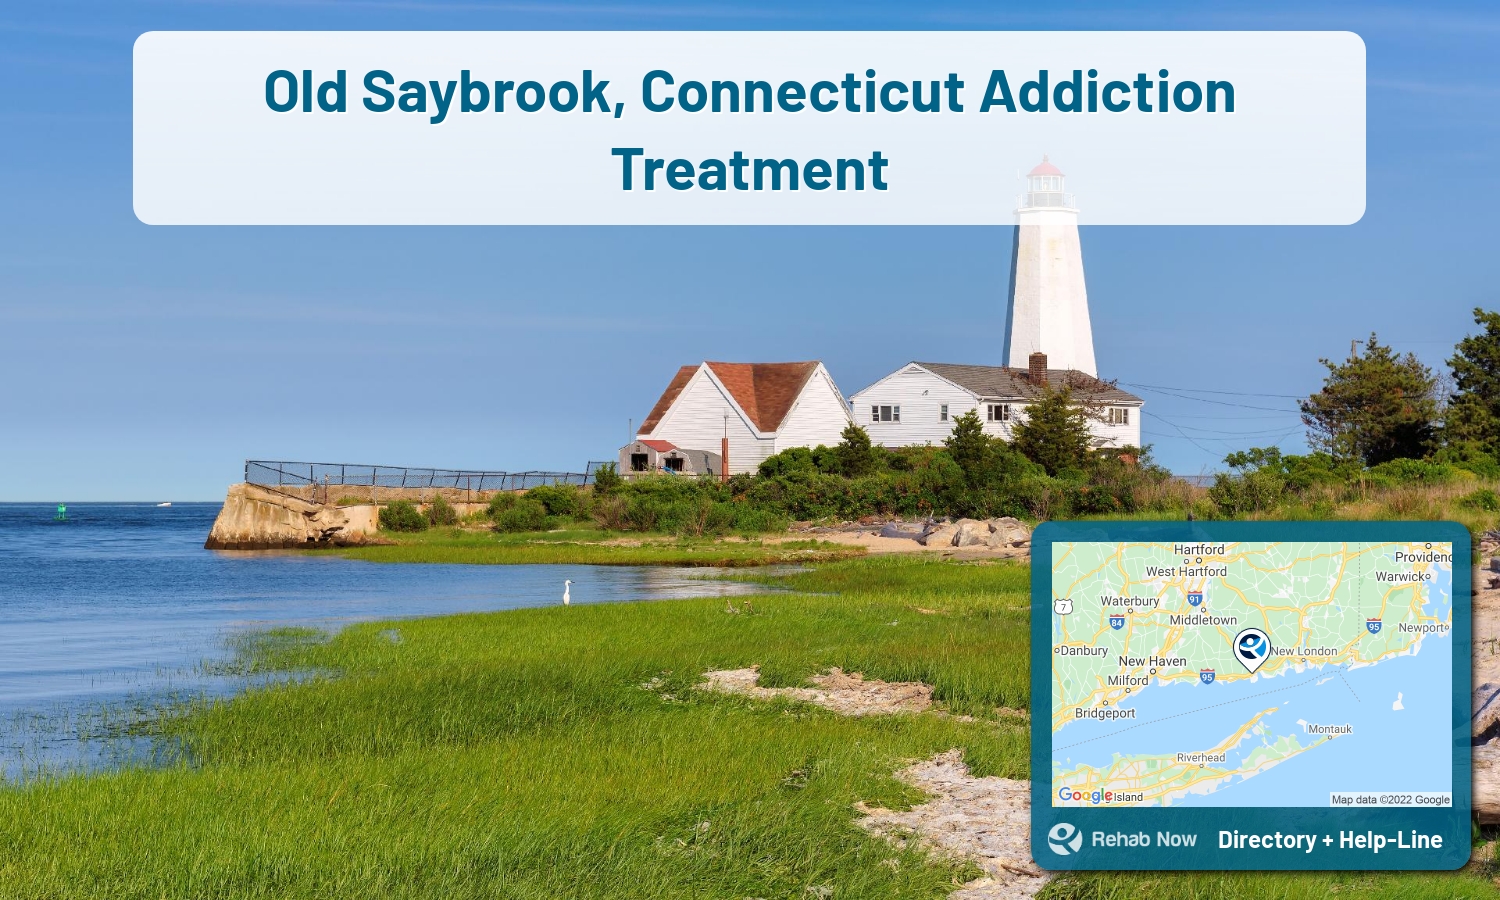 Drug rehab and alcohol treatment services nearby Old Saybrook, CT. Need help choosing a treatment program? Call our free hotline!